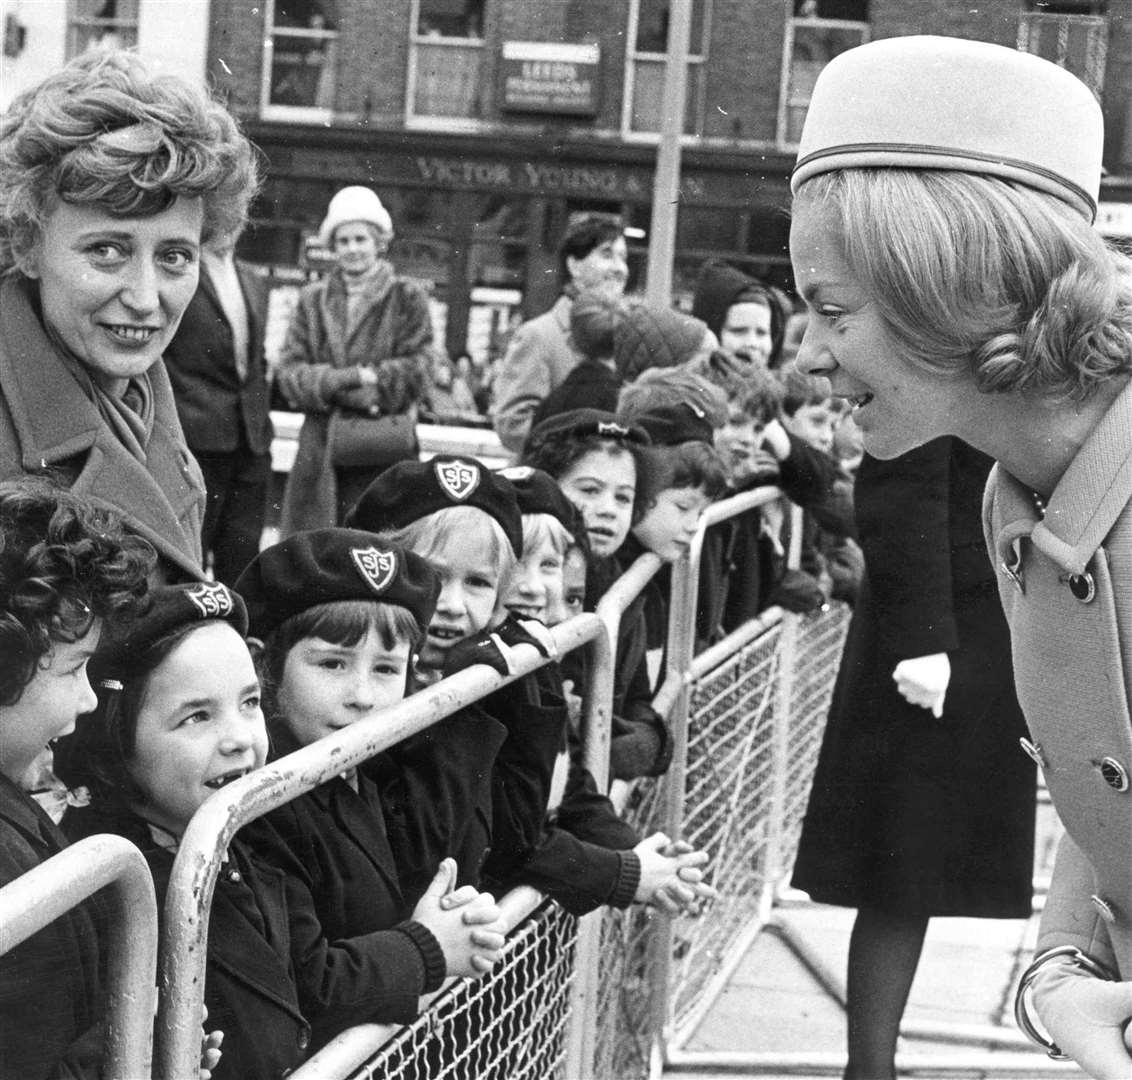 Gravesend's civic centre was officially opened by the Duchess of Kent in November 1968. Afterwards the Duchess chatted to some of the many schoolchildren waiting outside